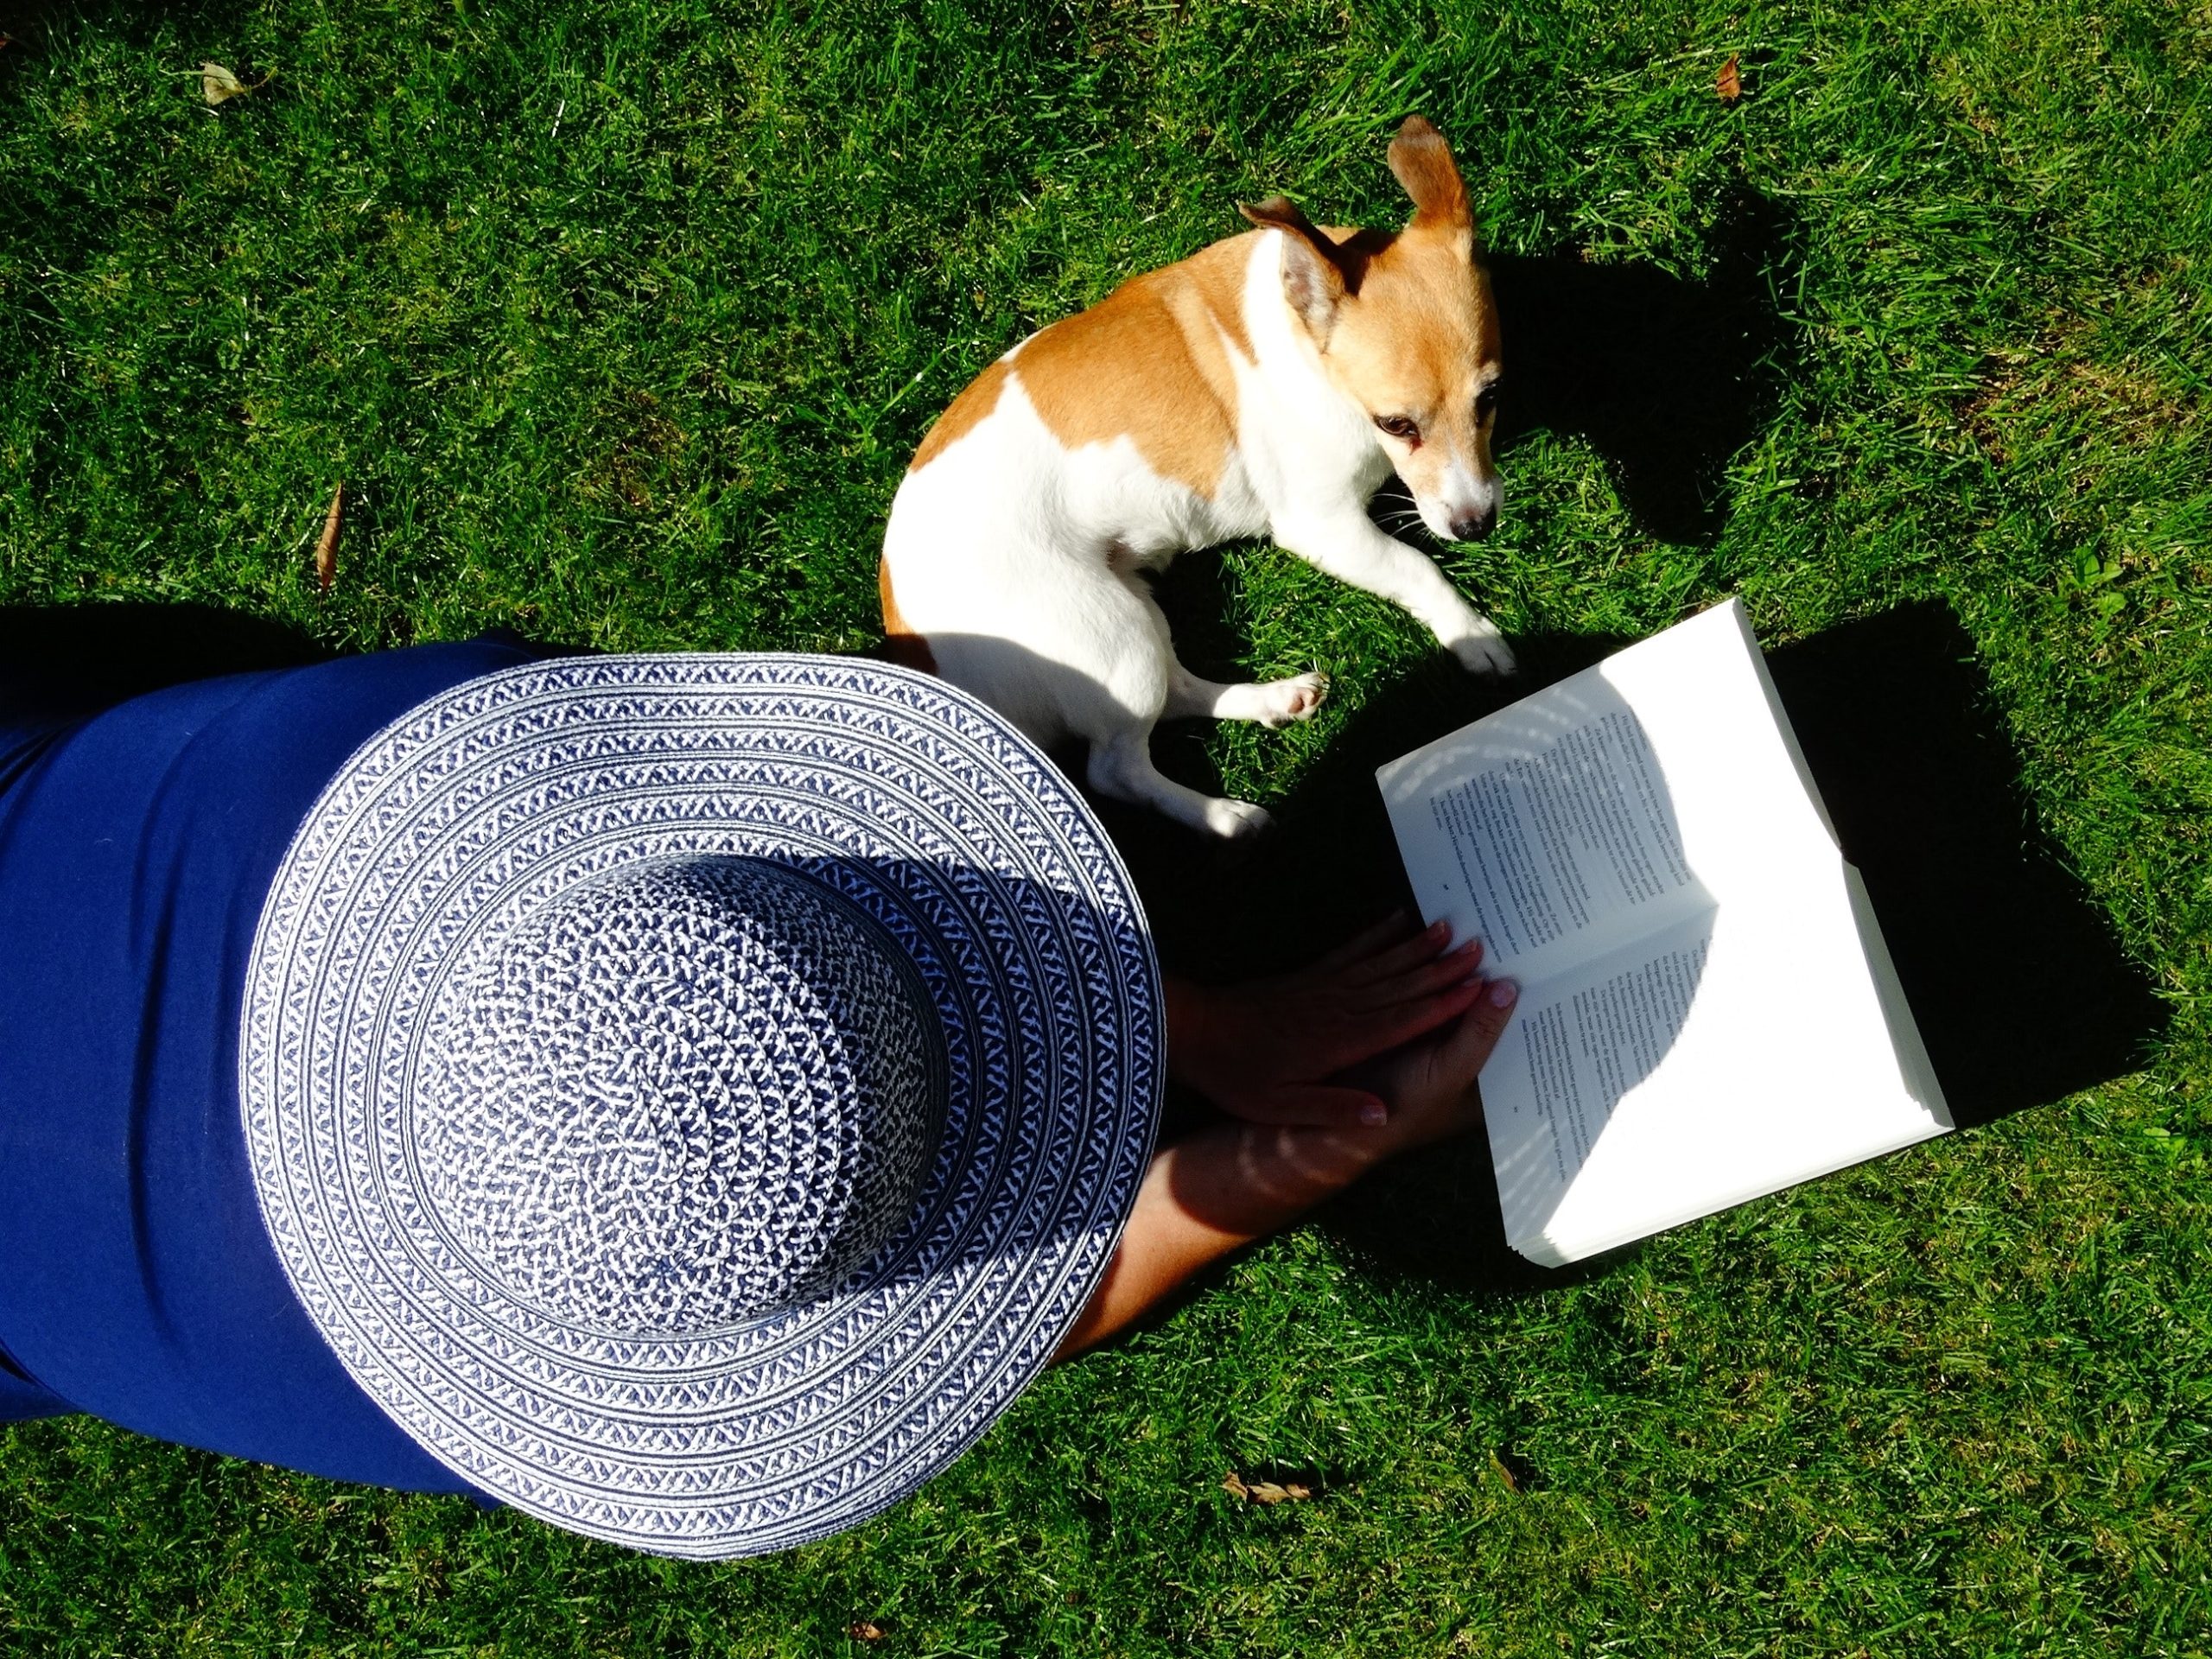 person in a sunhat reading outdoors next to a dog